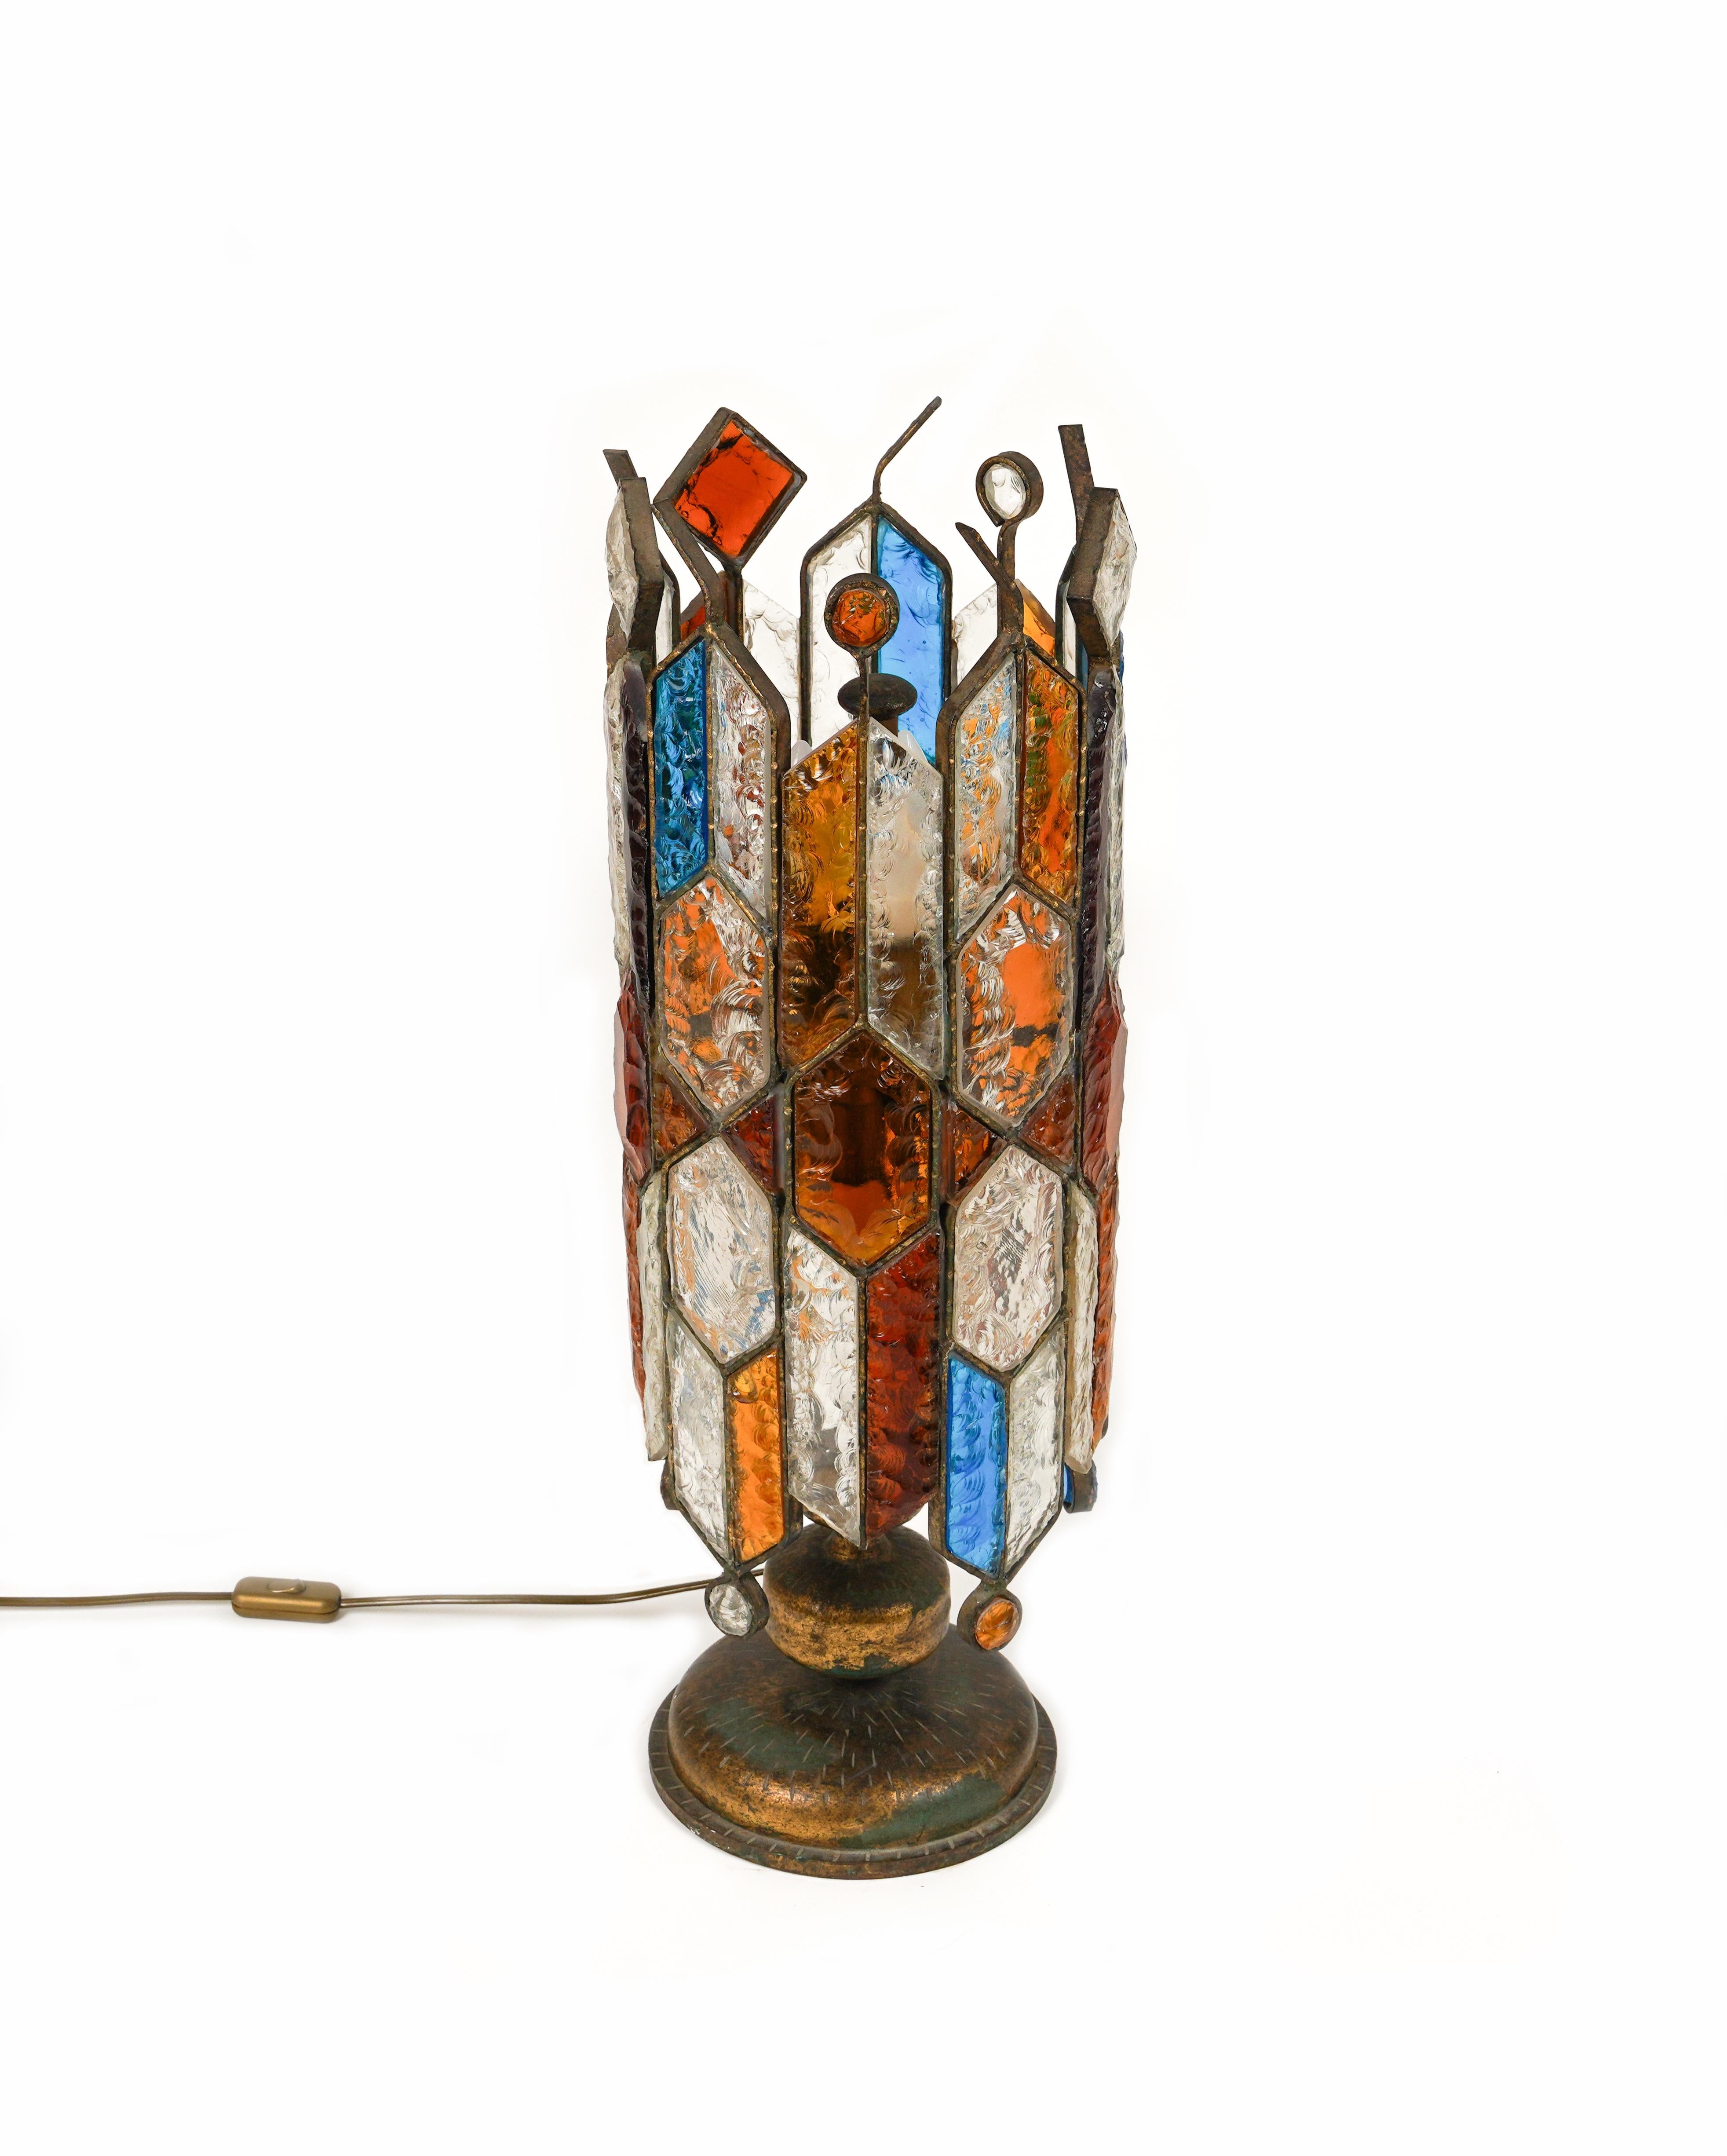 Table or Floor Lamp Wrought Iron and Hammered Glass by Longobard, Italy, 1970s For Sale 3